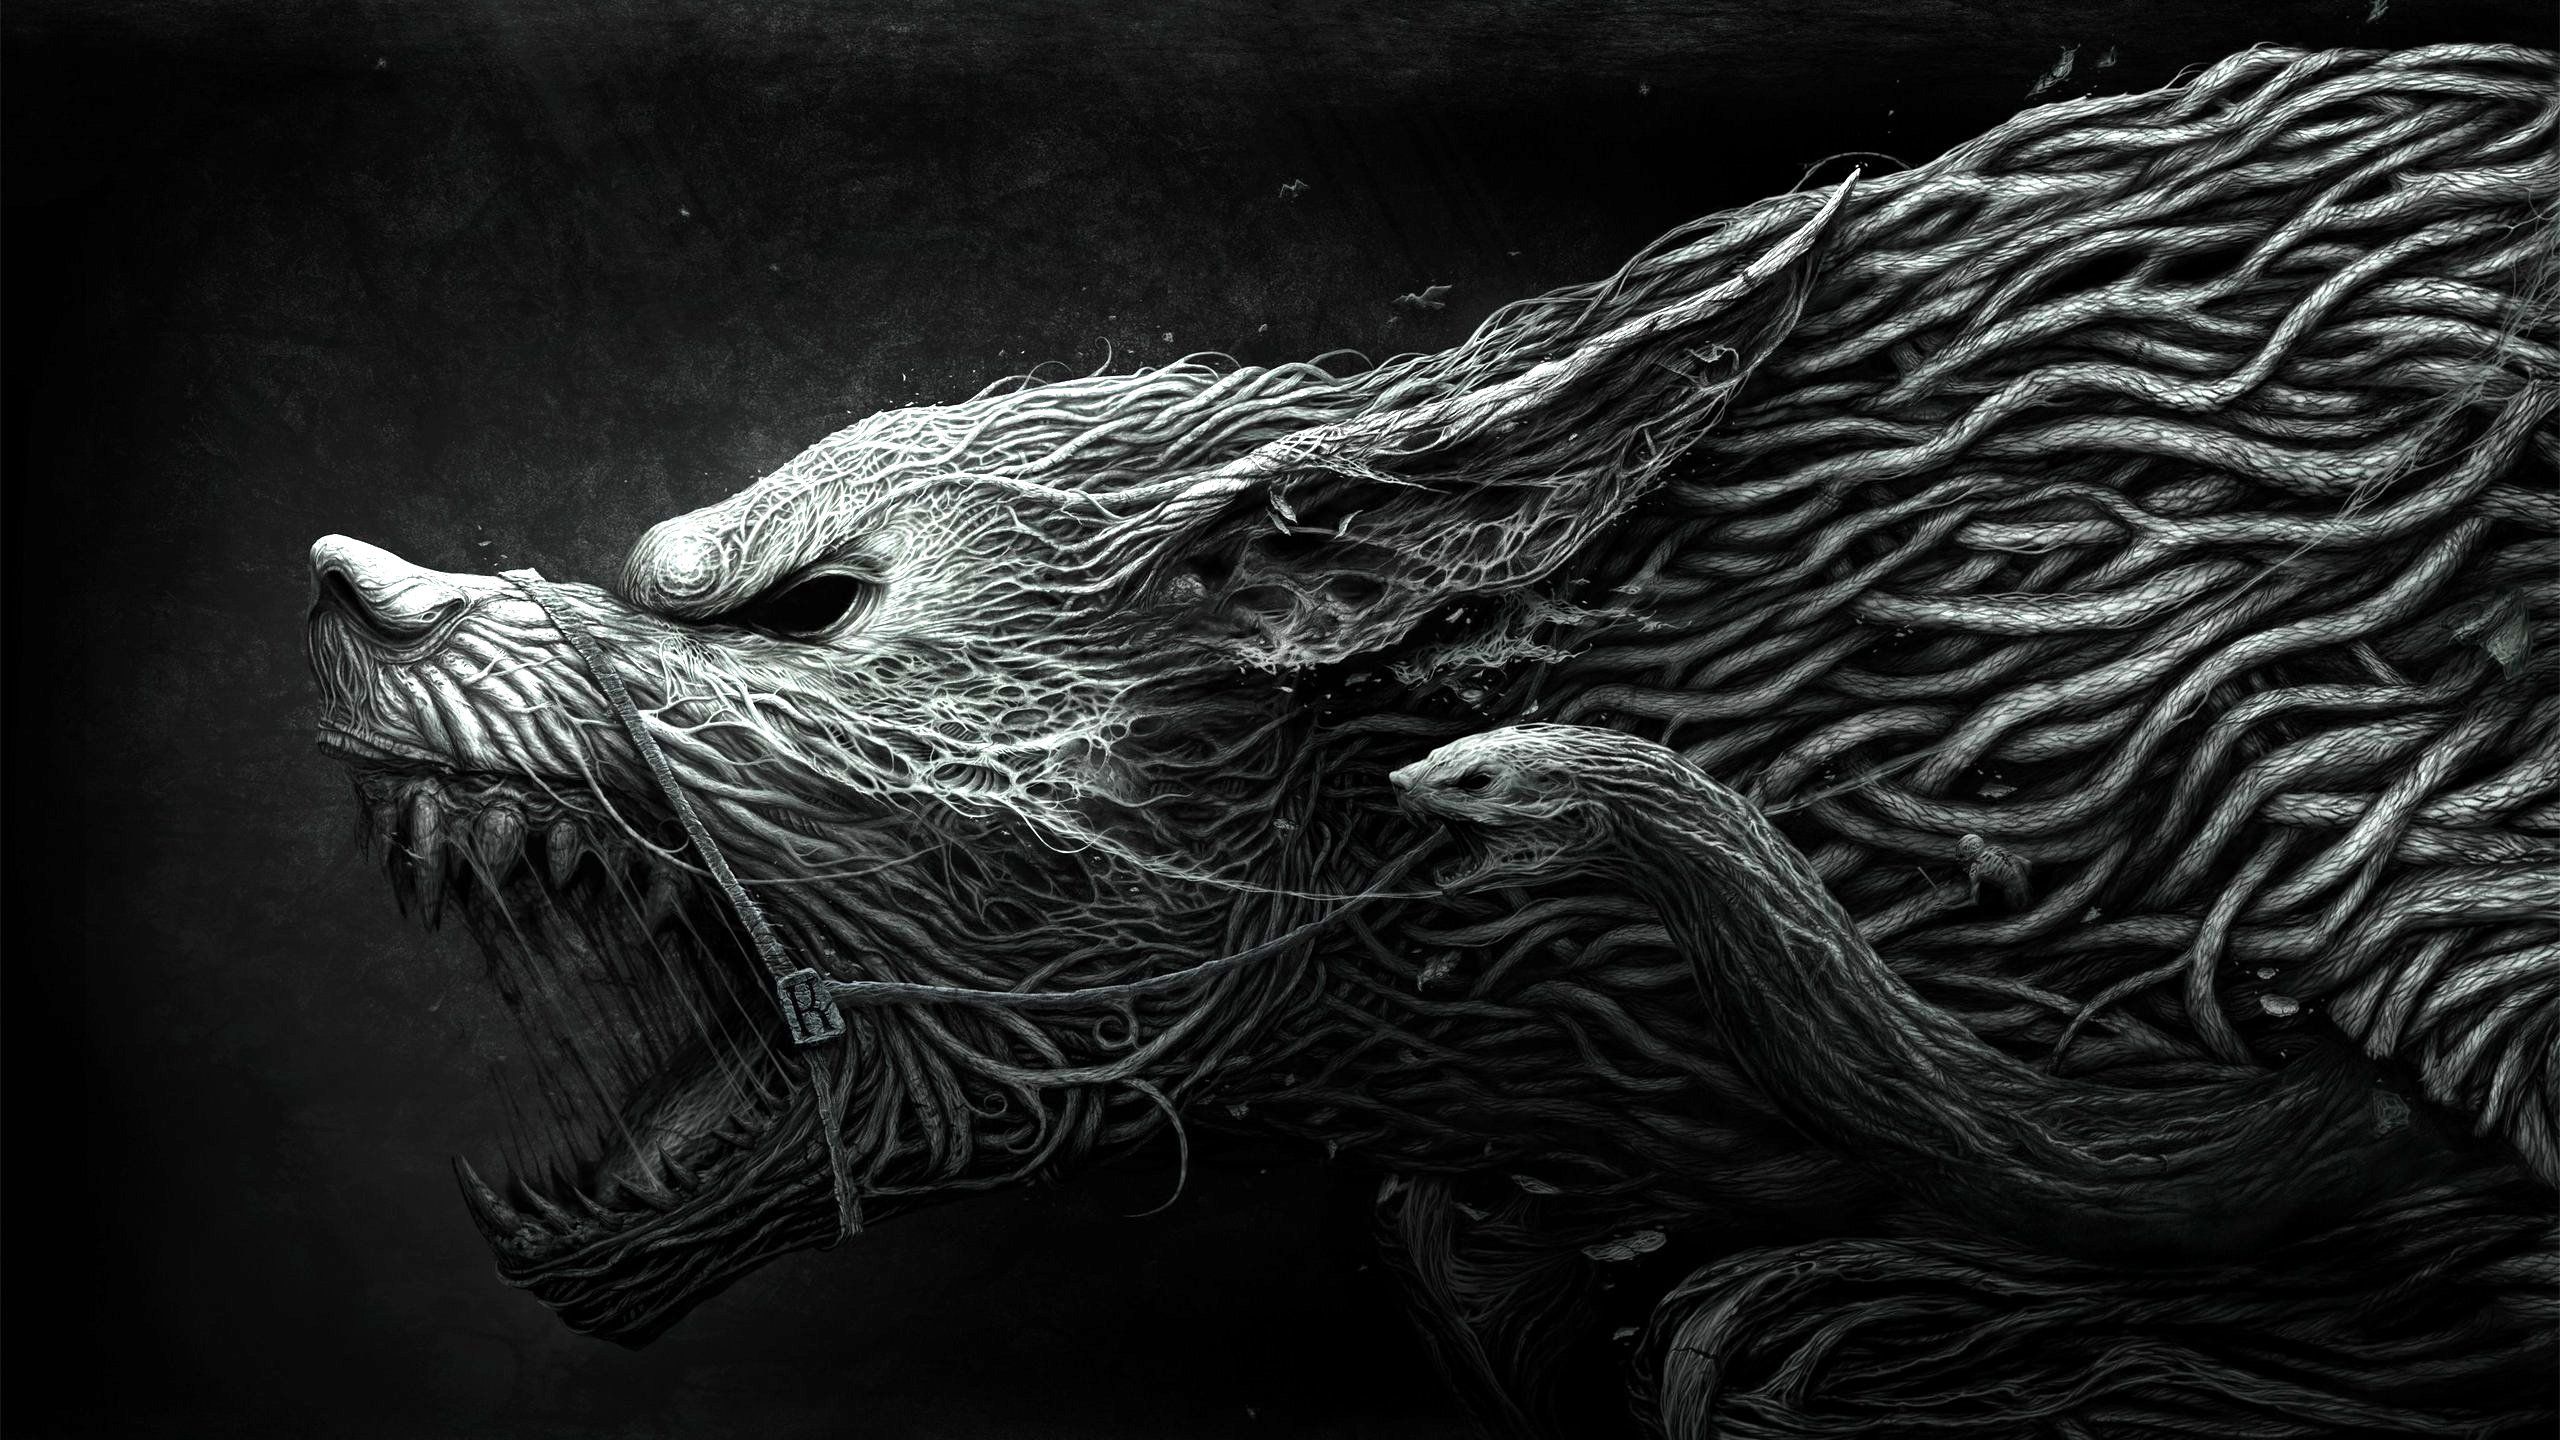 Download wallpaper 2560x1440 wolf, teeth, drawing, aggression